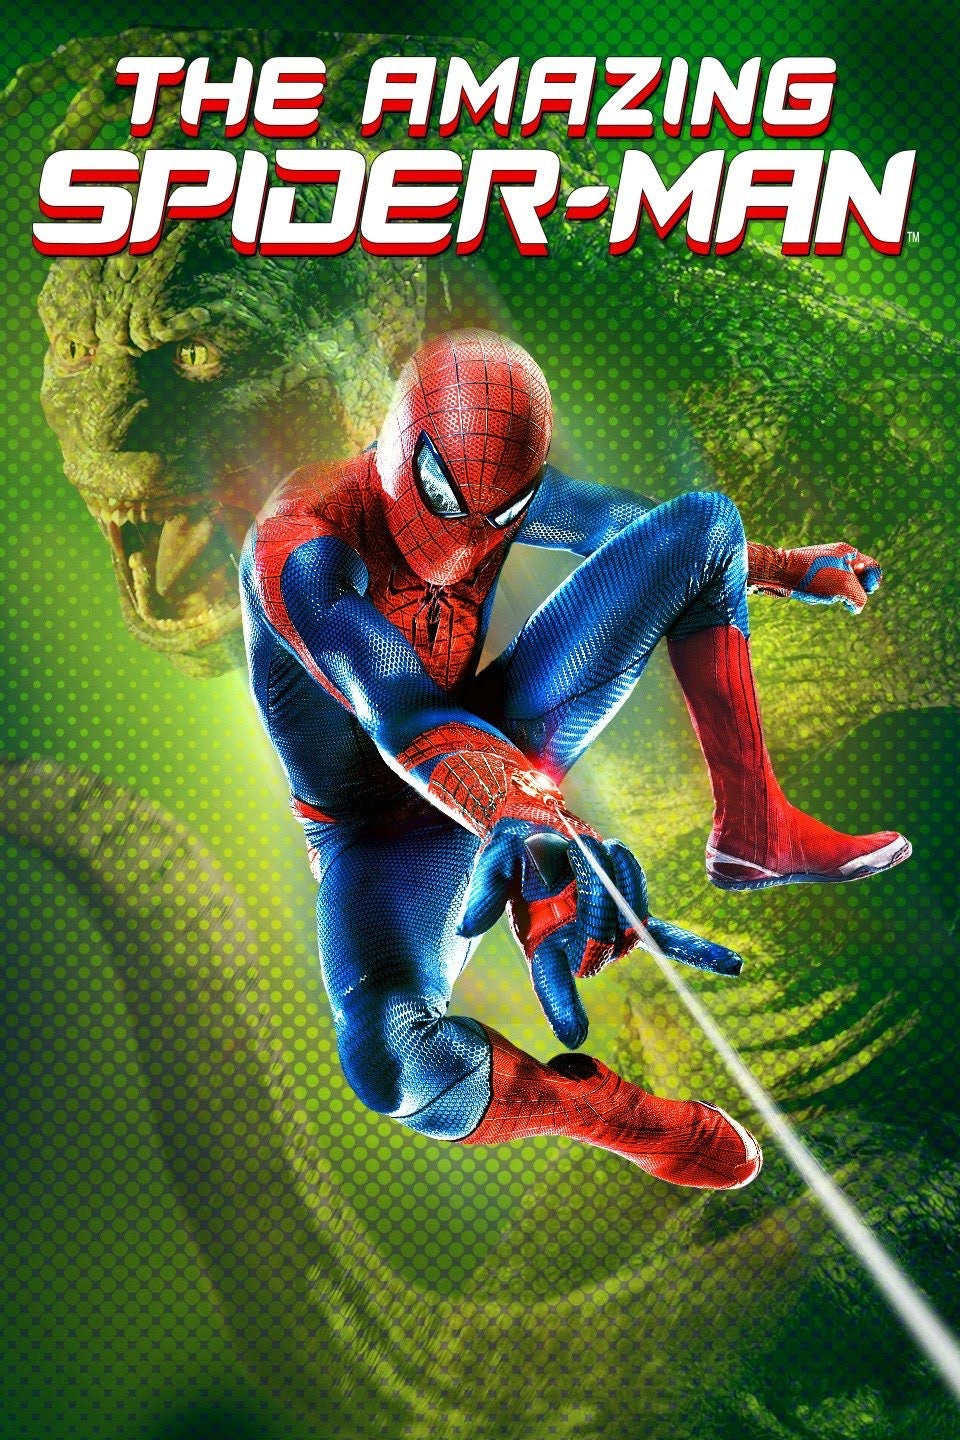 The Amazing Spider-Man (2012) Vudu or Movies Anywhere HD code